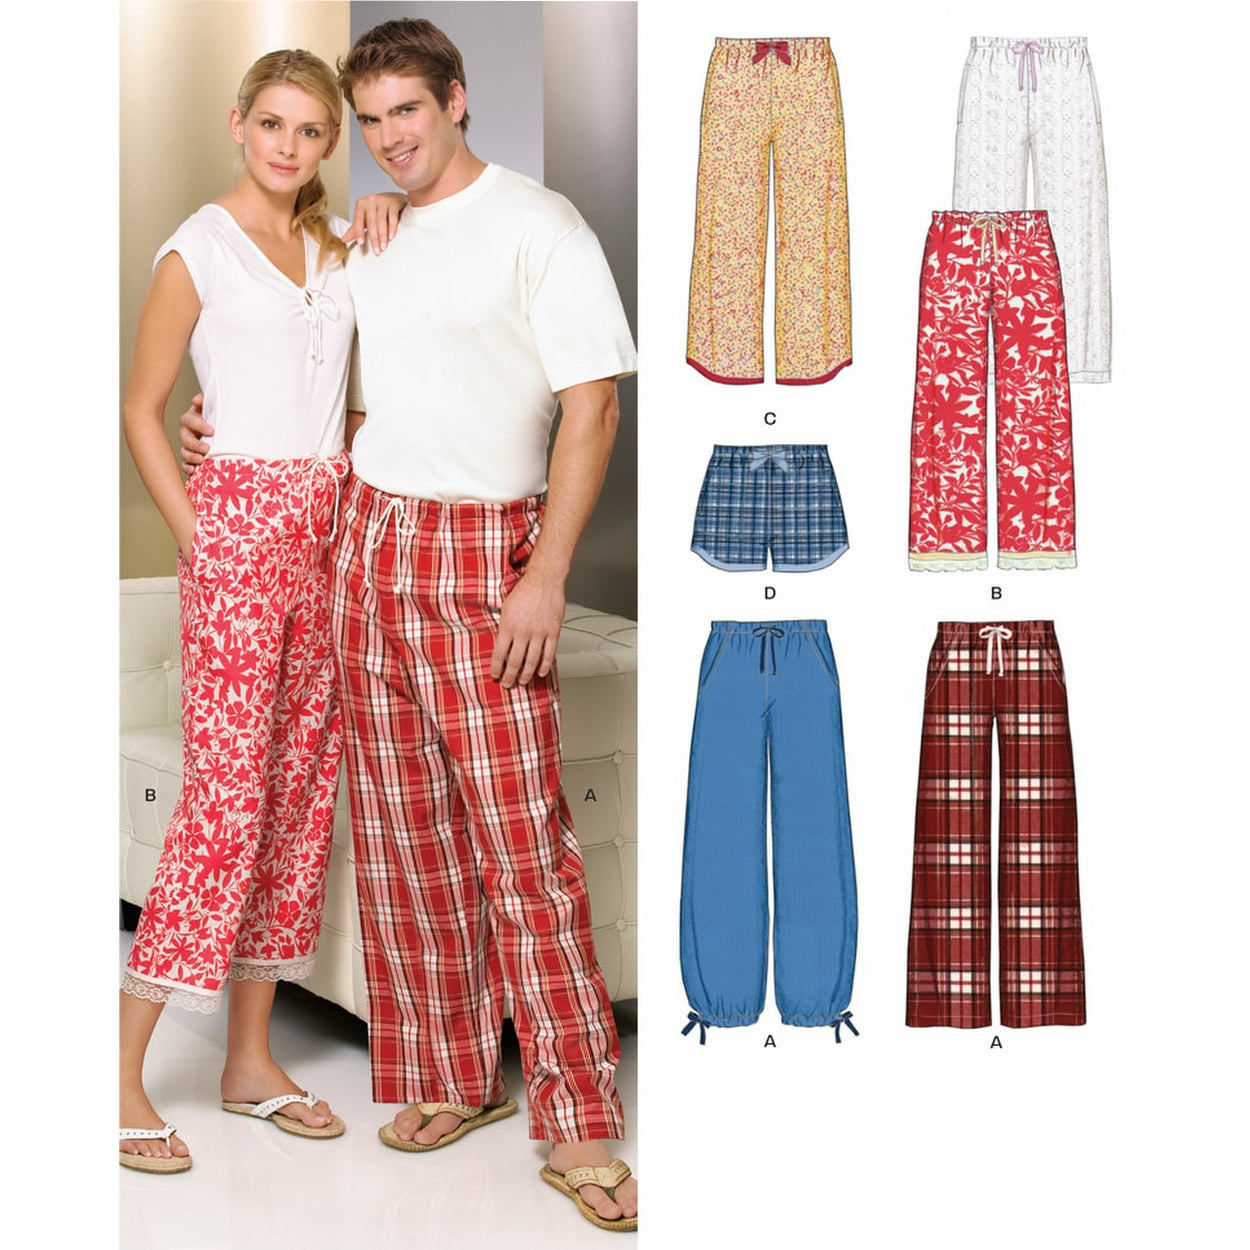 NL6859 Misses, Mens, and Teens Pyjama Pattern | Easy from Jaycotts Sewing Supplies